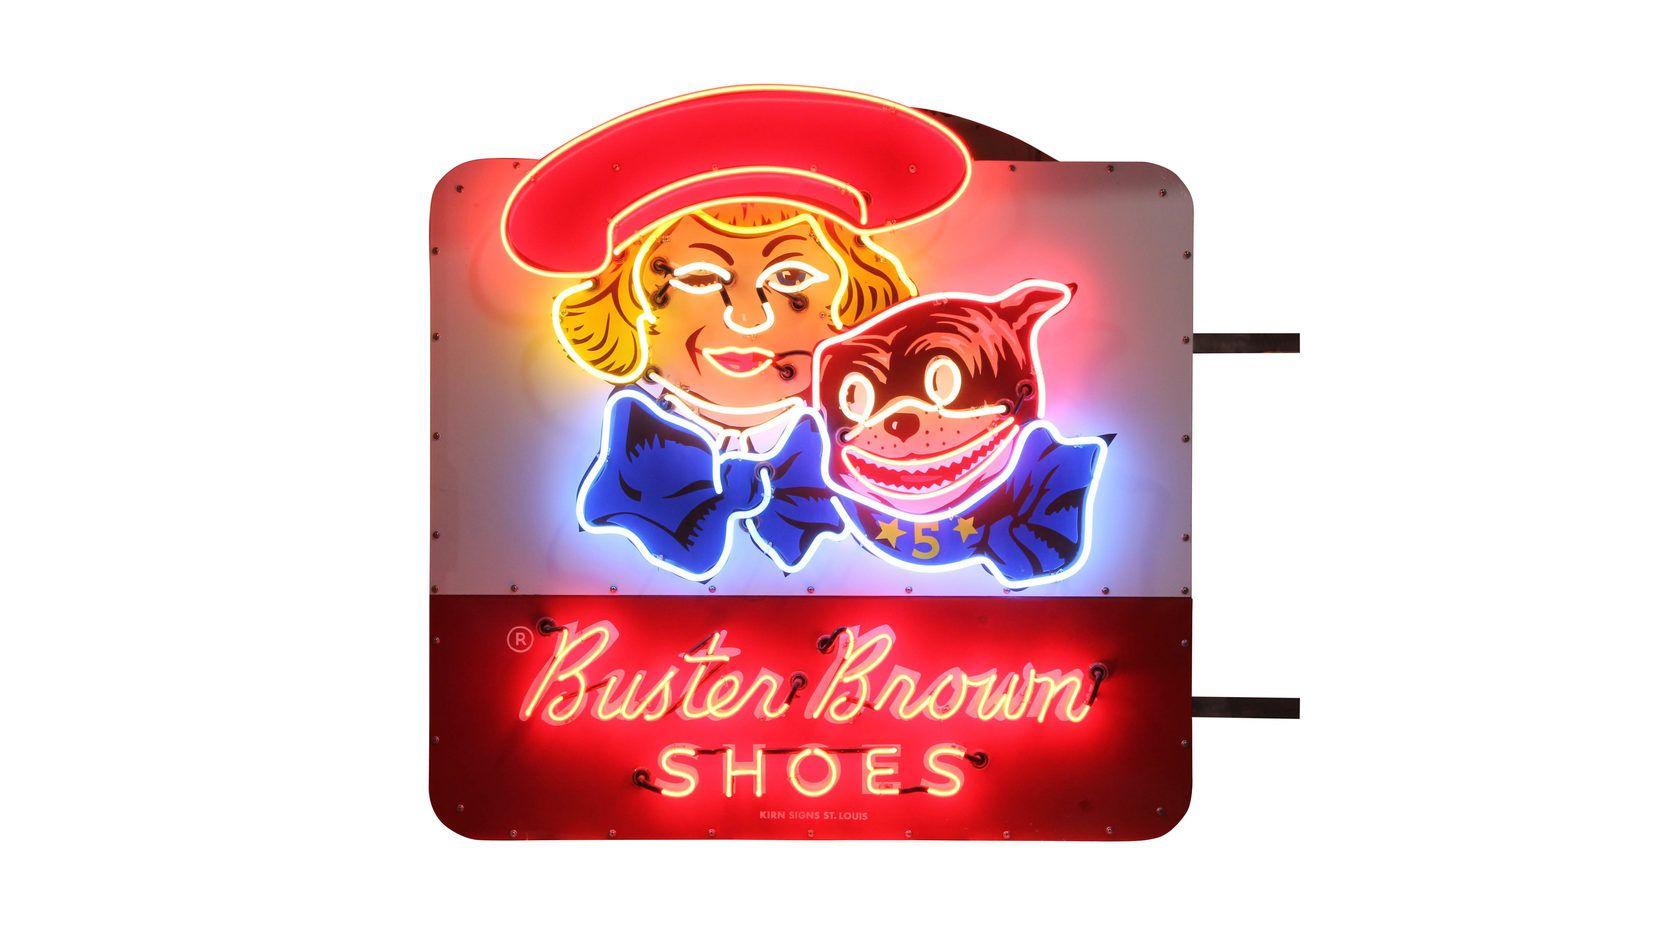 Buster Brown Logo - Buster Brown Shoes 54x53x16. S19. The Walker Sign Collection 2015